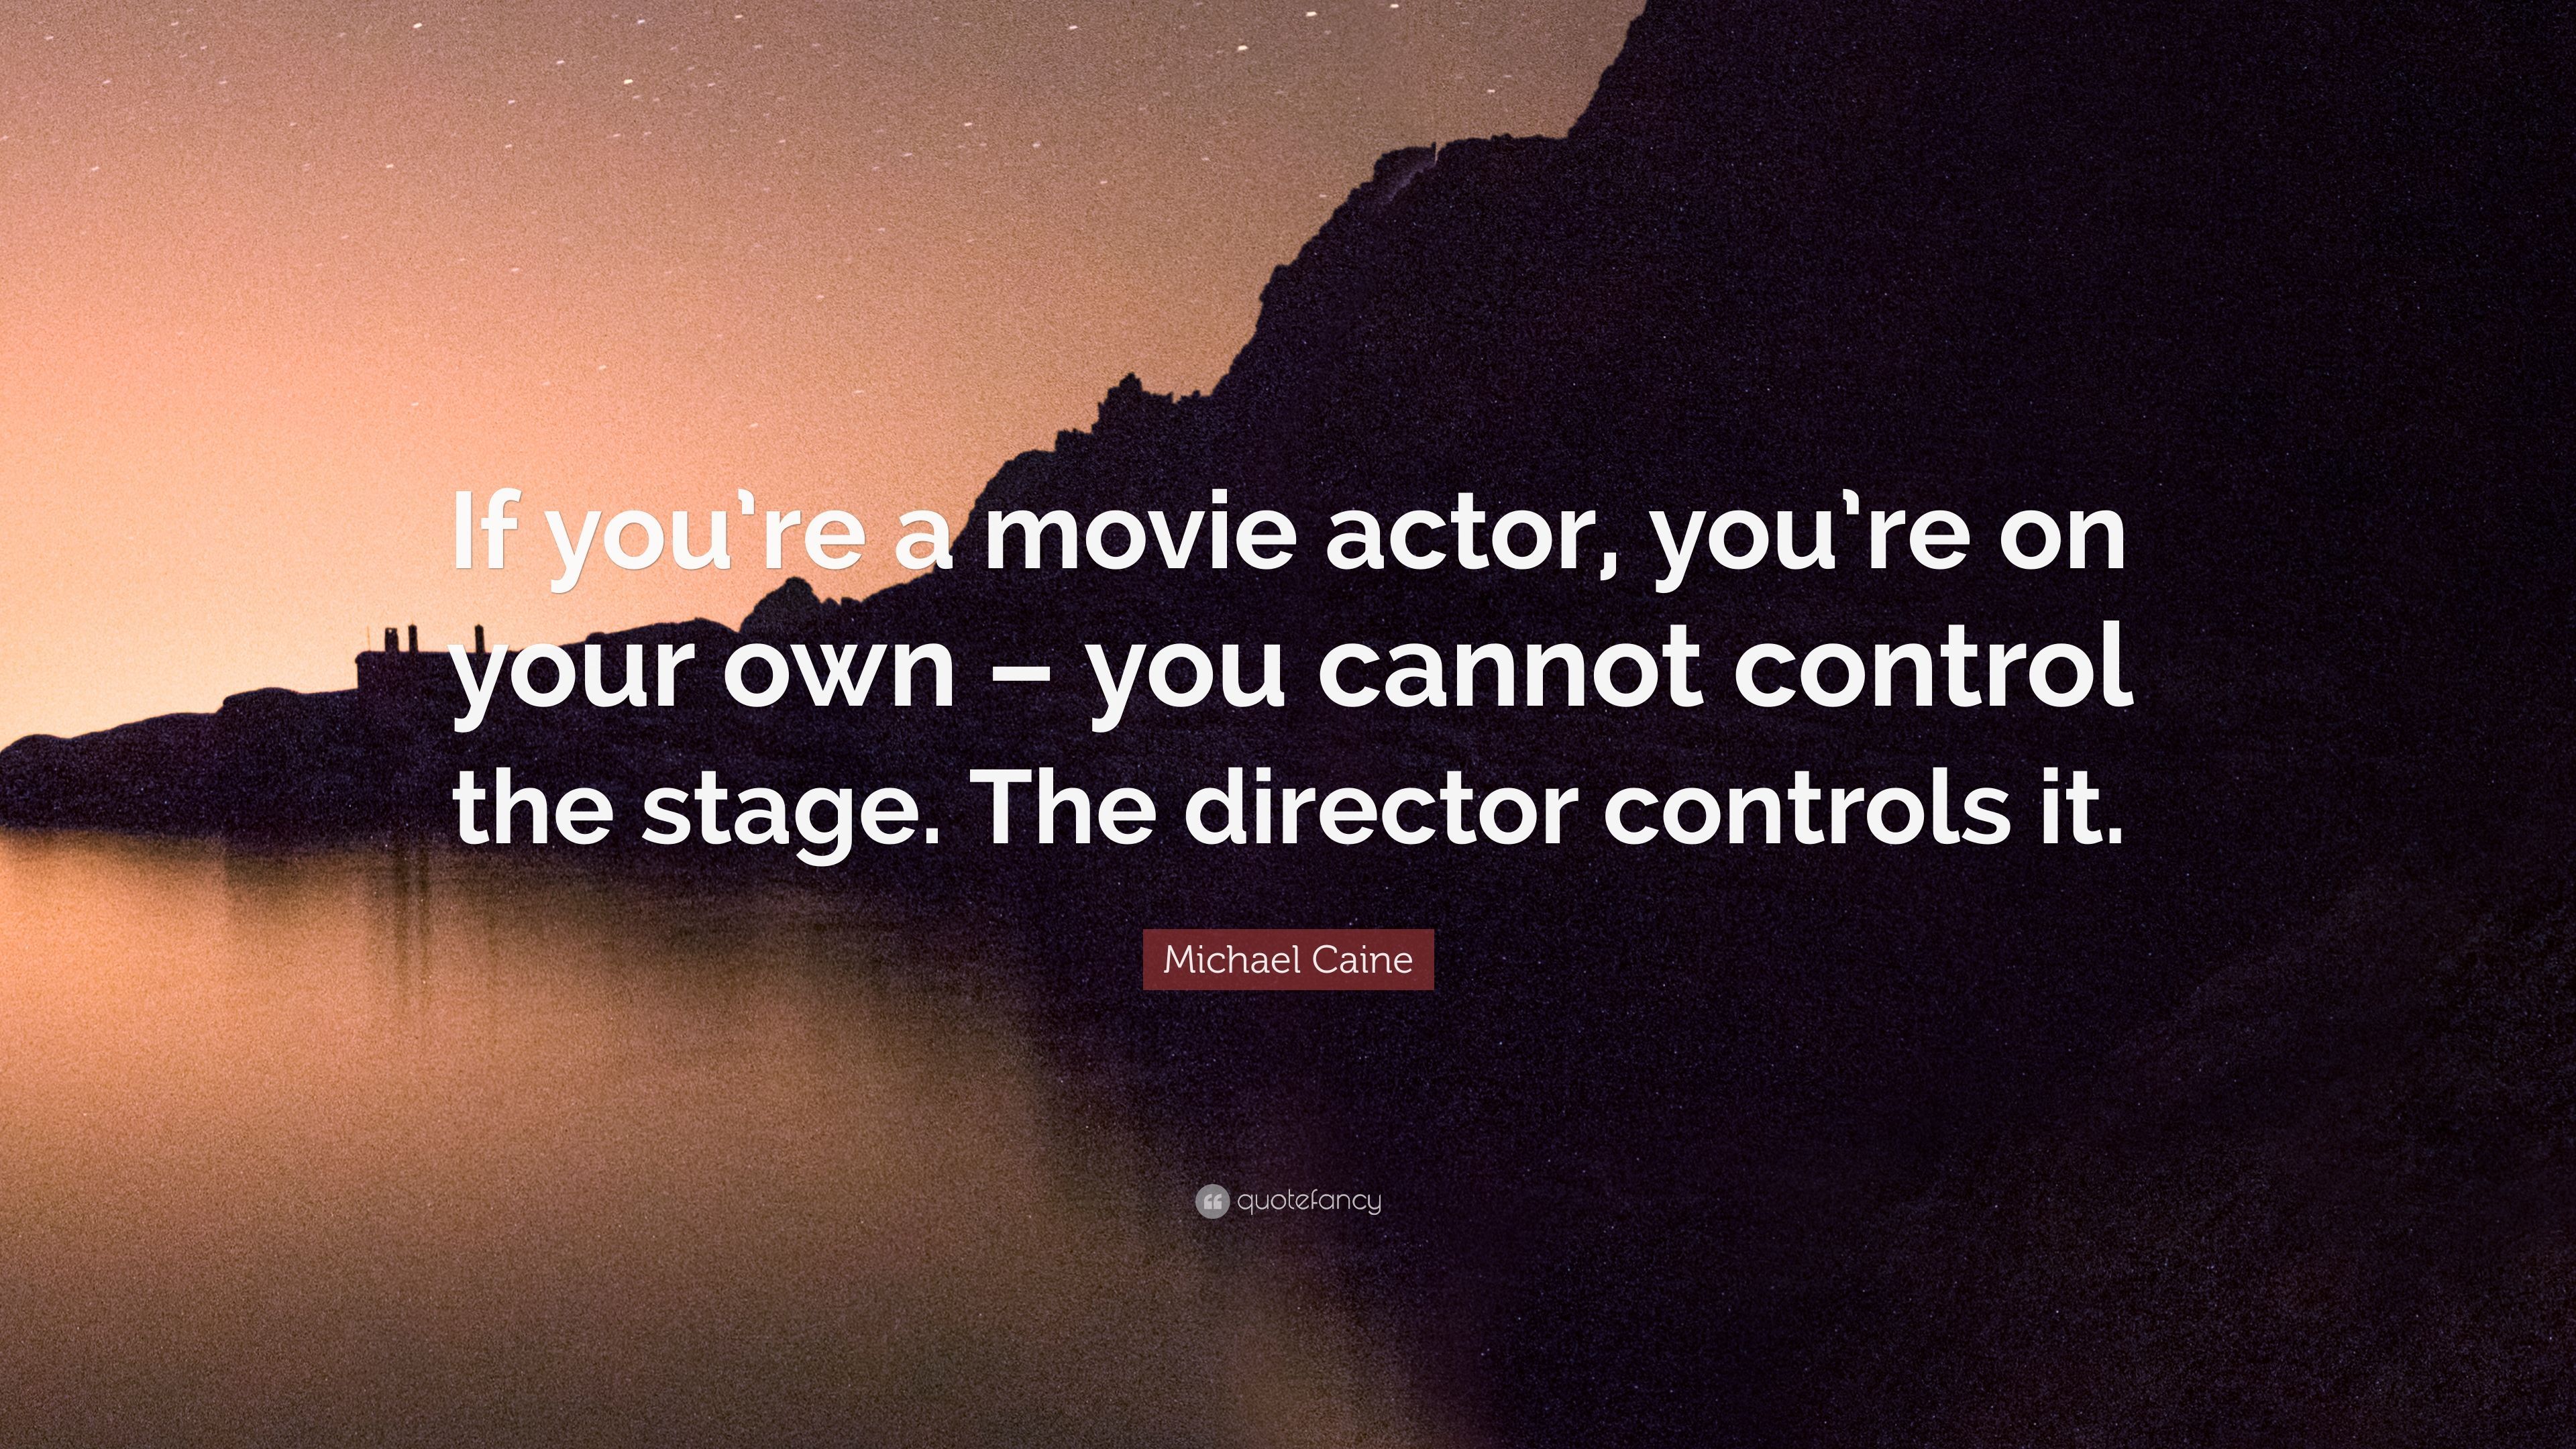 Michael Caine Quote: “If you're a movie actor, you're on your own